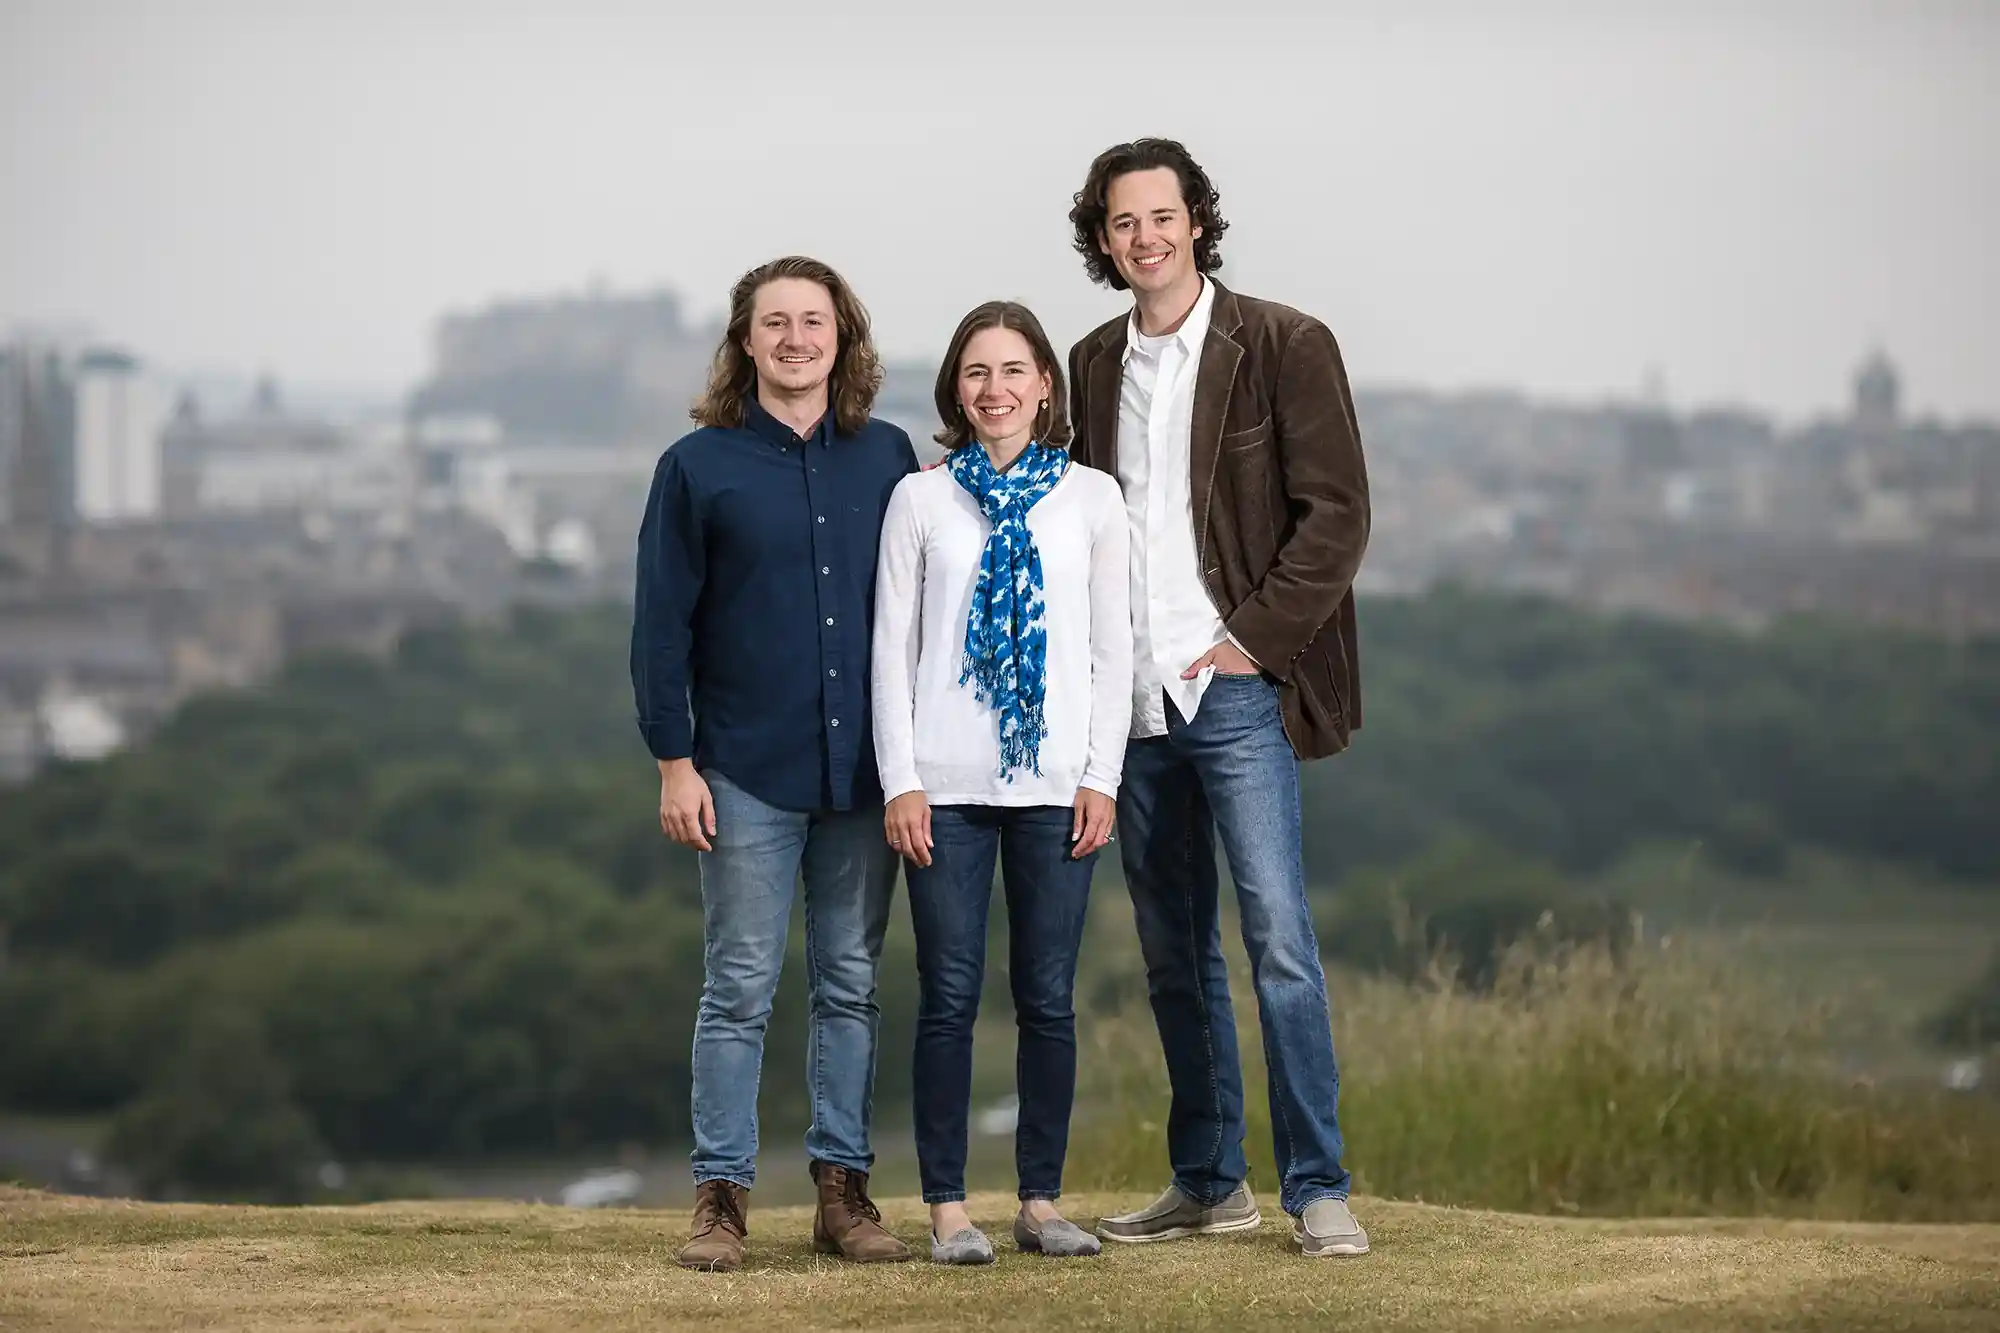 Three people stand outdoors on a hill with a cityscape in the background. They are casually dressed and smiling at the camera.